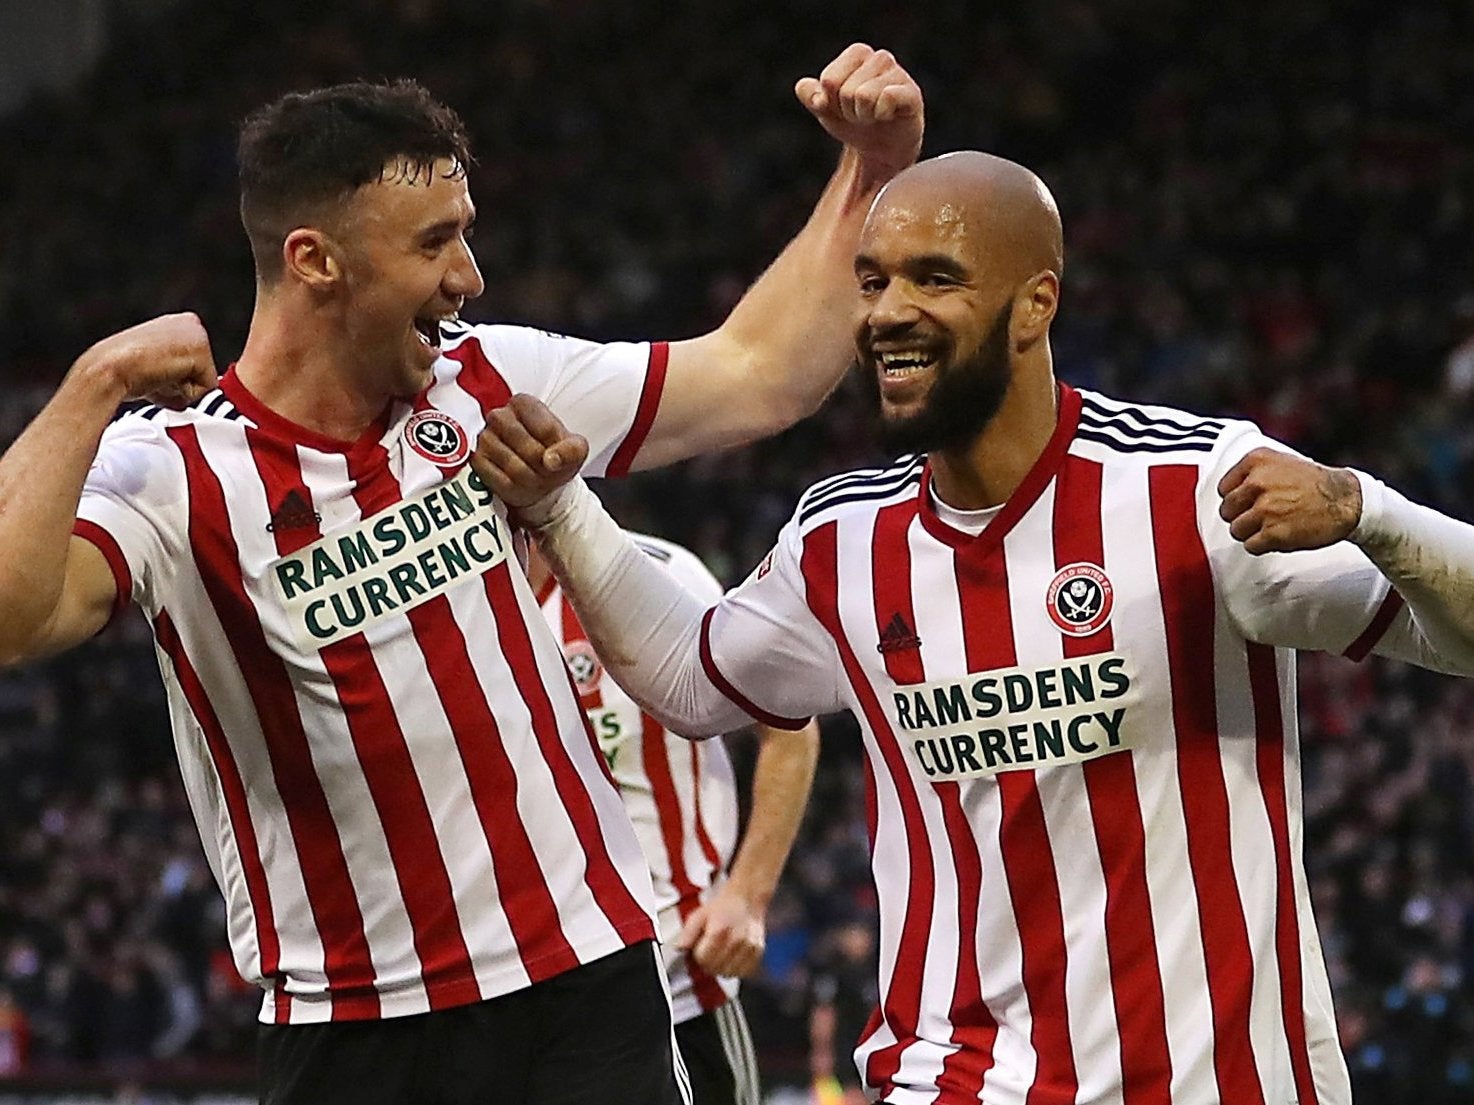 David McGoldrick clinched victory for Sheffield United as they move up to second